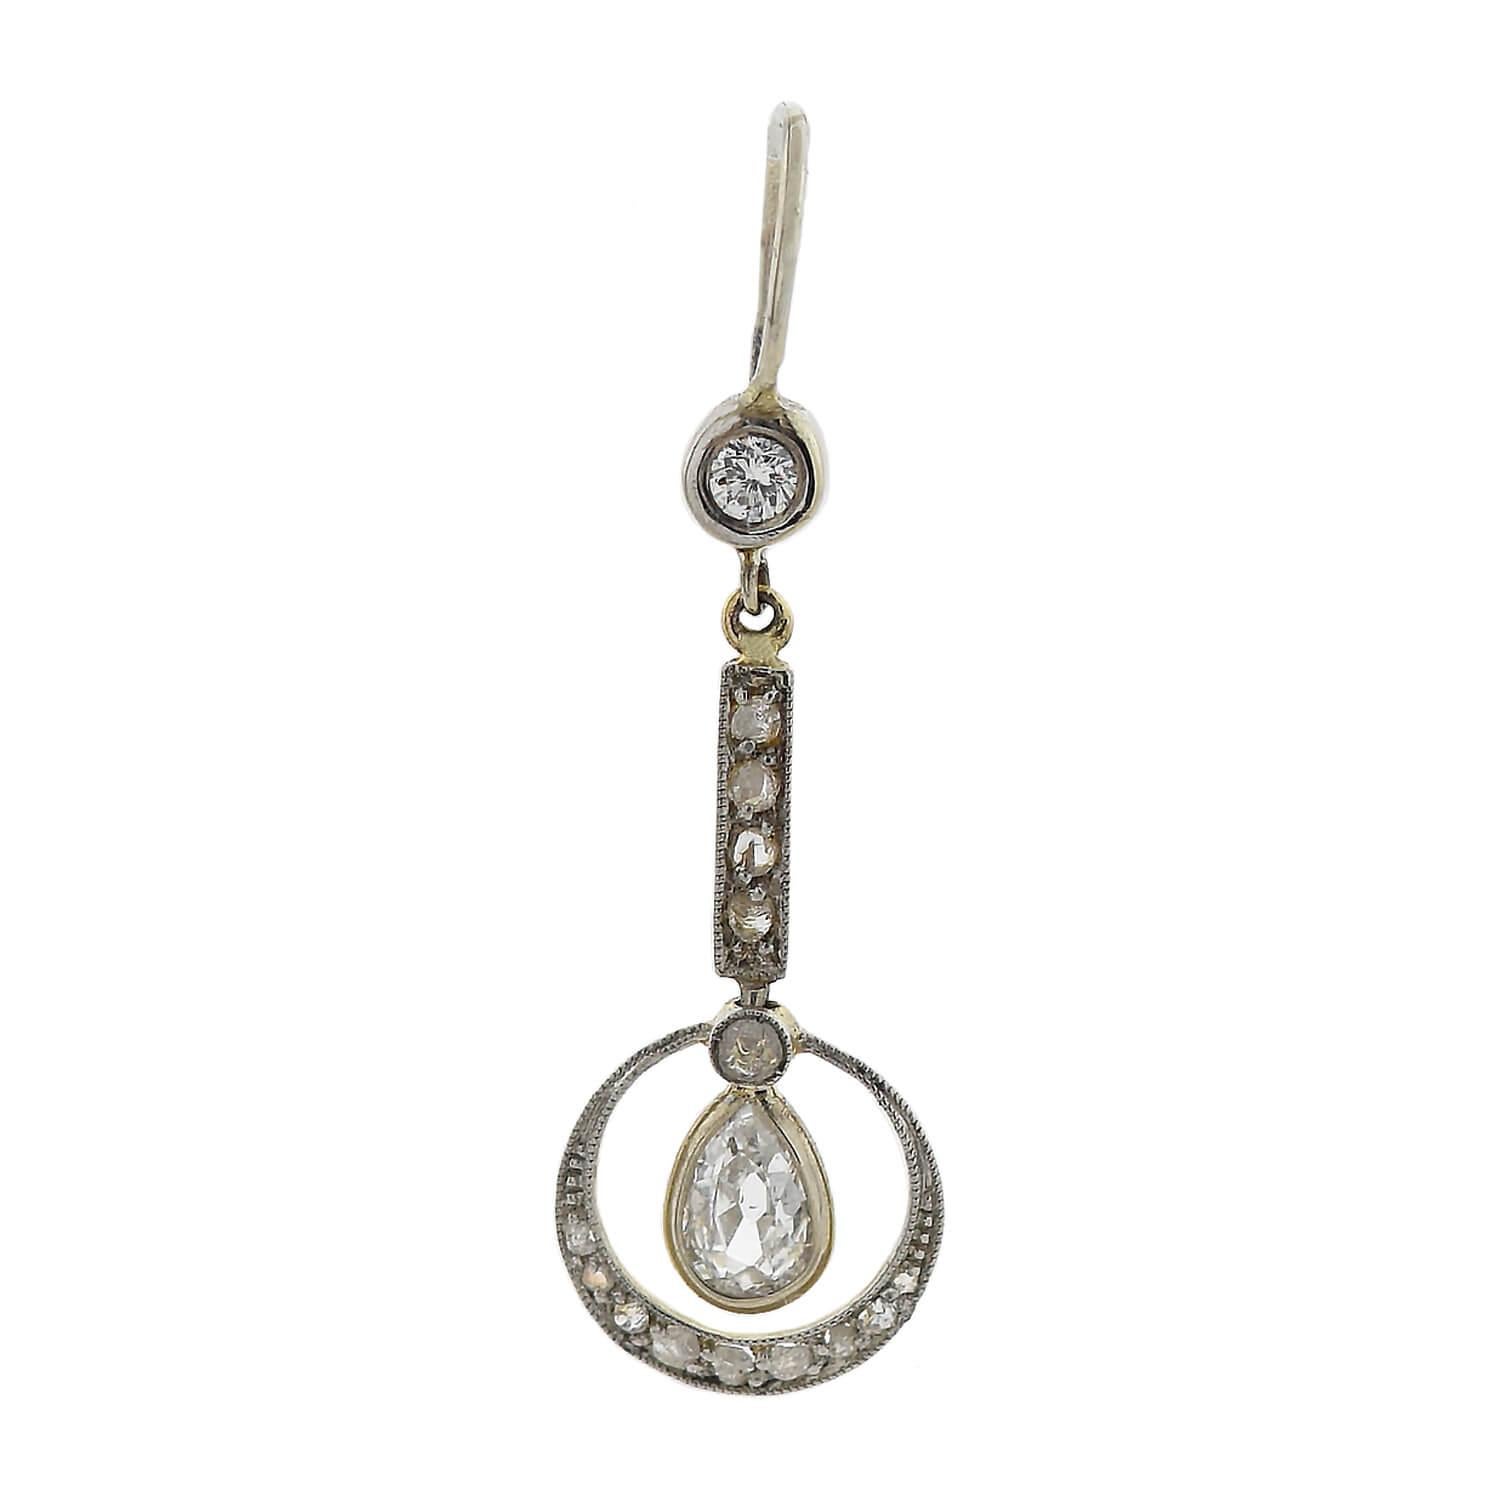 A beautiful pair of diamond earrings from the Edwardian (ca1910s) era! Crafted in platinum-topped 14kt yellow gold, these diamond-encrusted earrings have a lovely dangling design. Each hangs from a 14kt gold wire which attaches at a bezel set